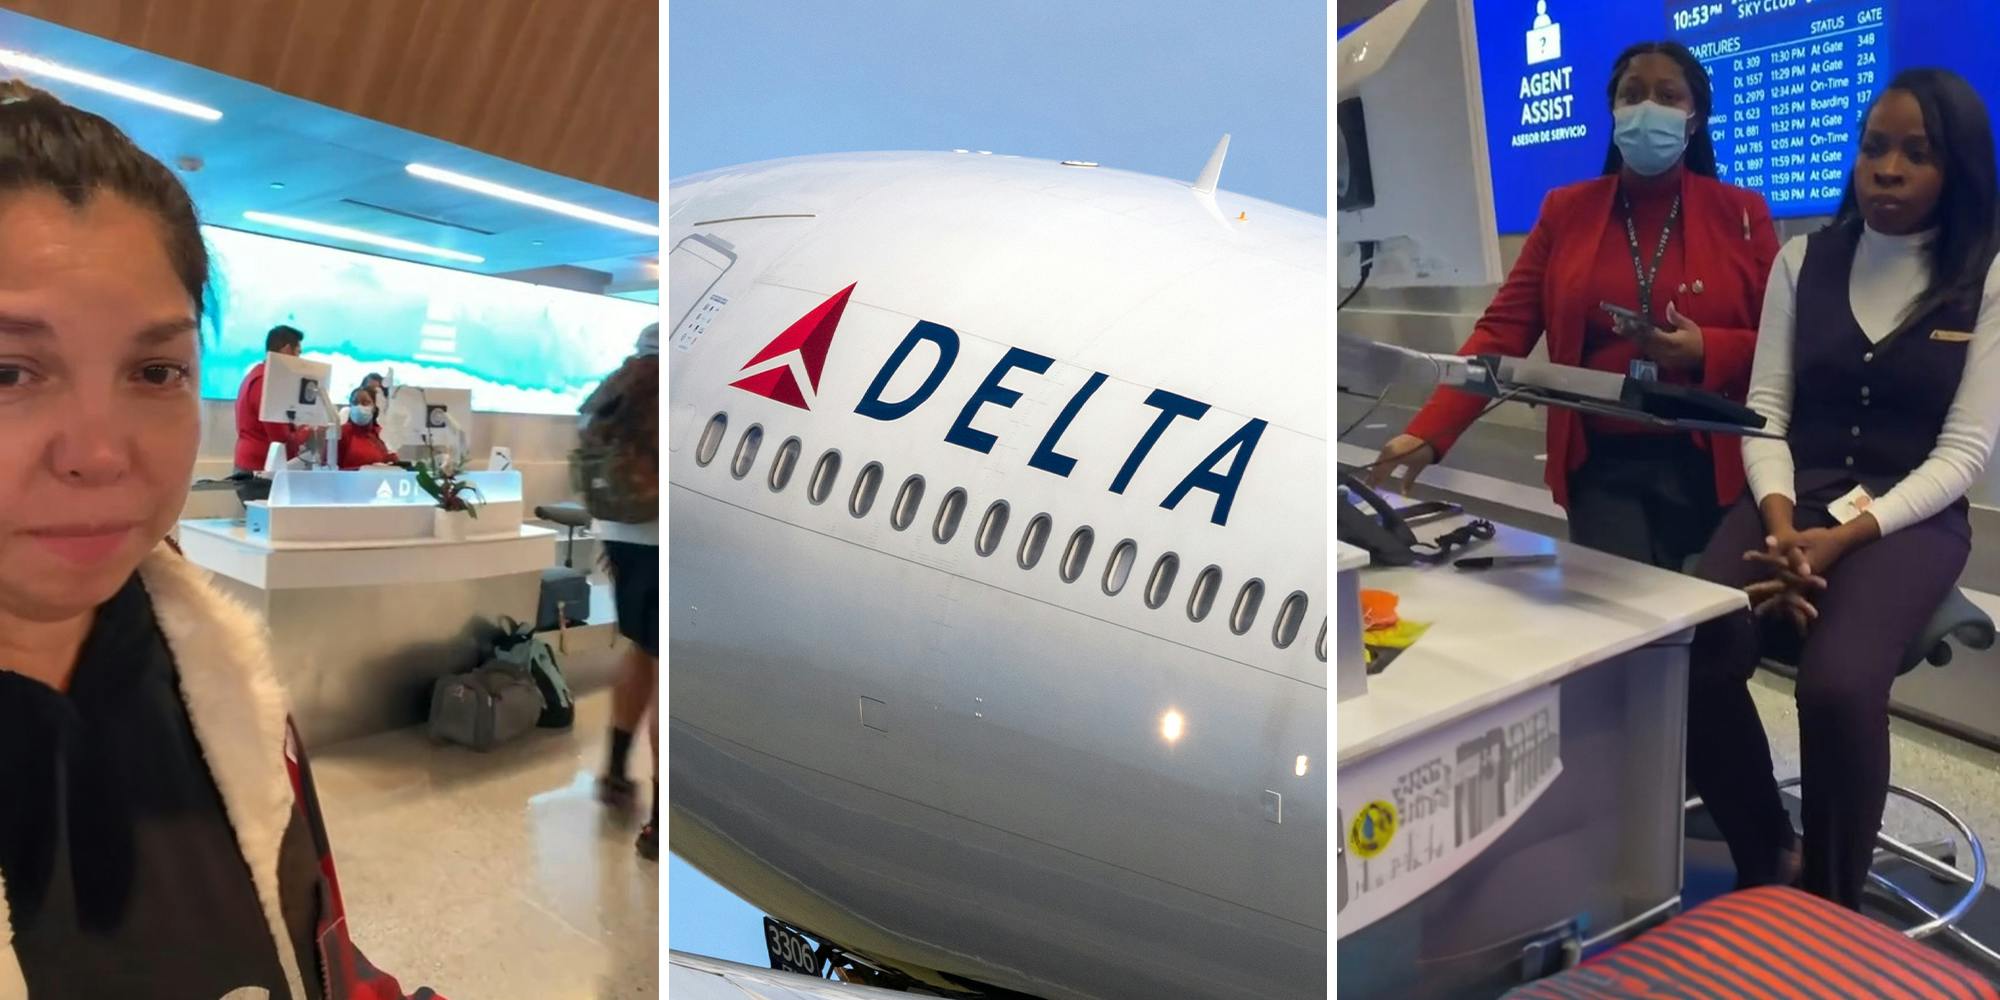 Delta customer says workers ‘abused’ their power, wouldn’t let her on flight